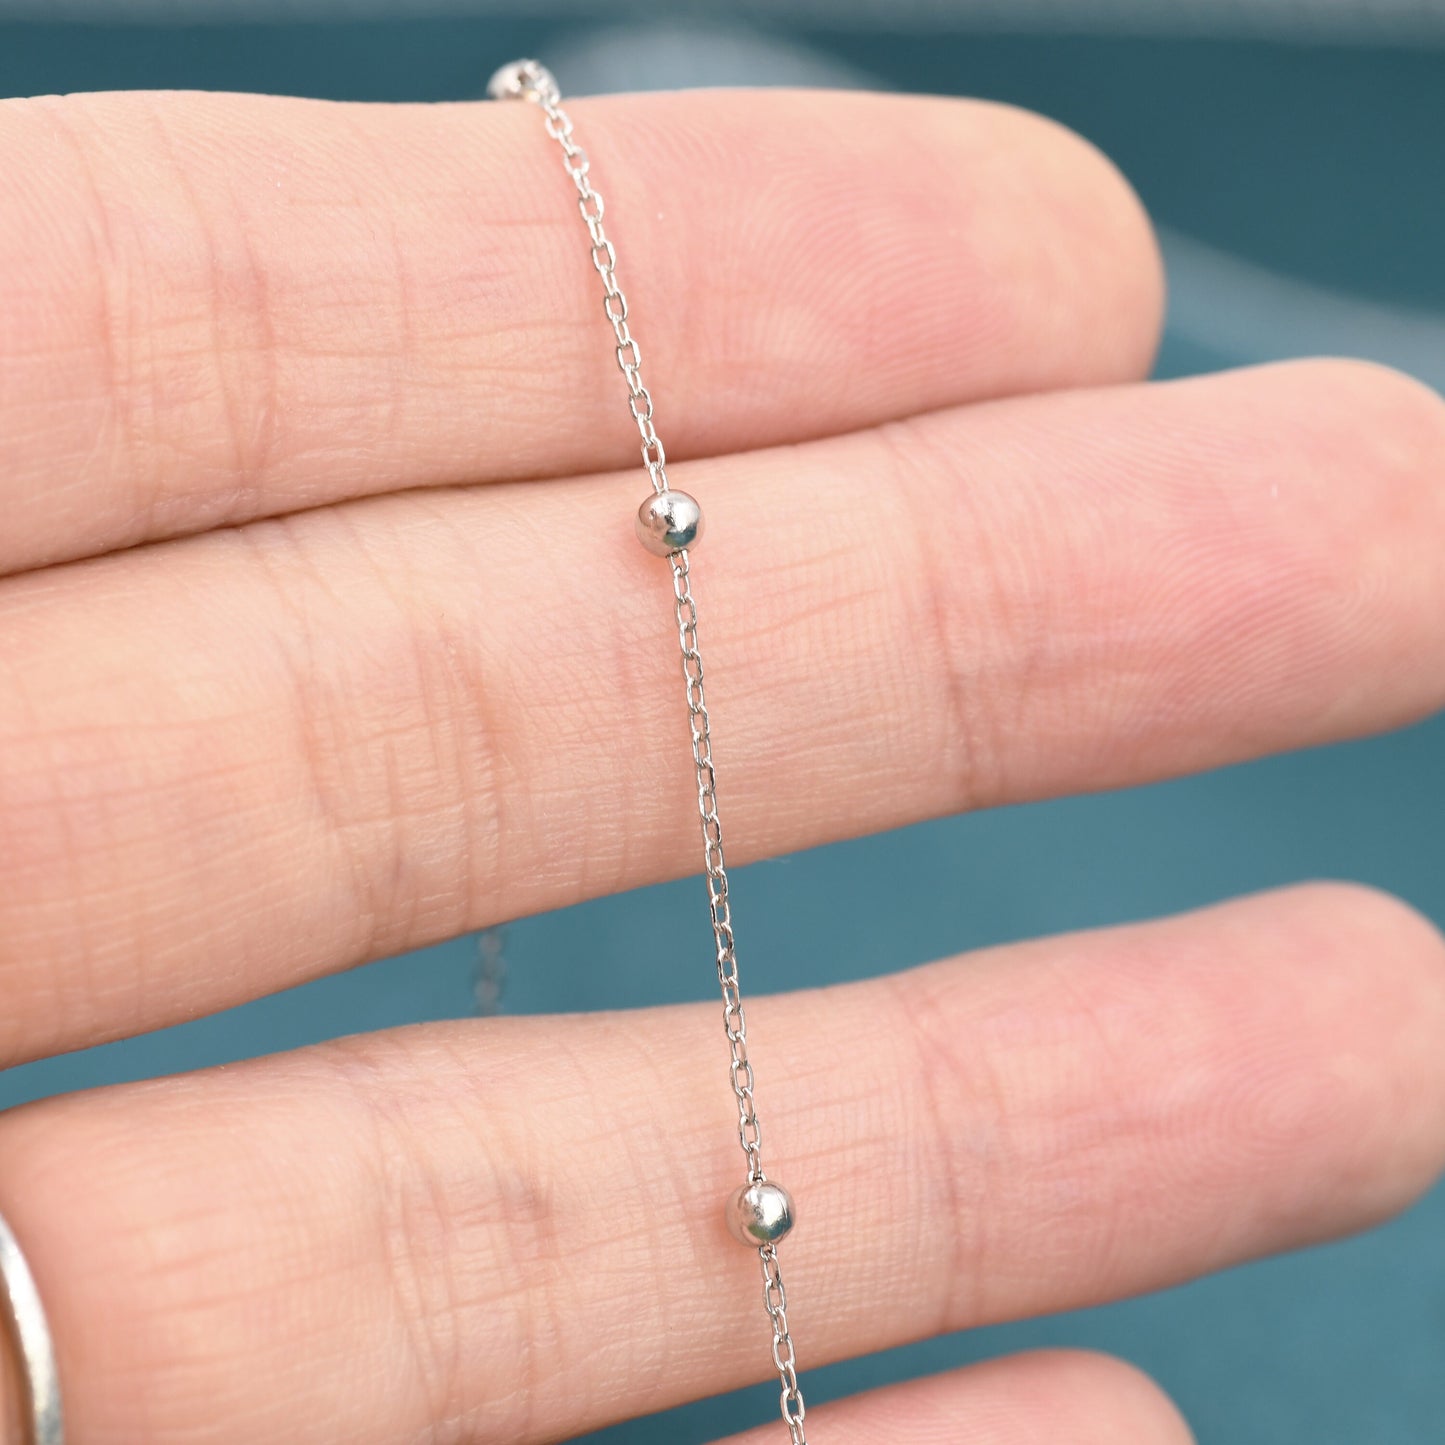 Beaded Choker Necklace in Sterling Silver, Delicate Satellite Ball Chain Necklace, Short Necklace